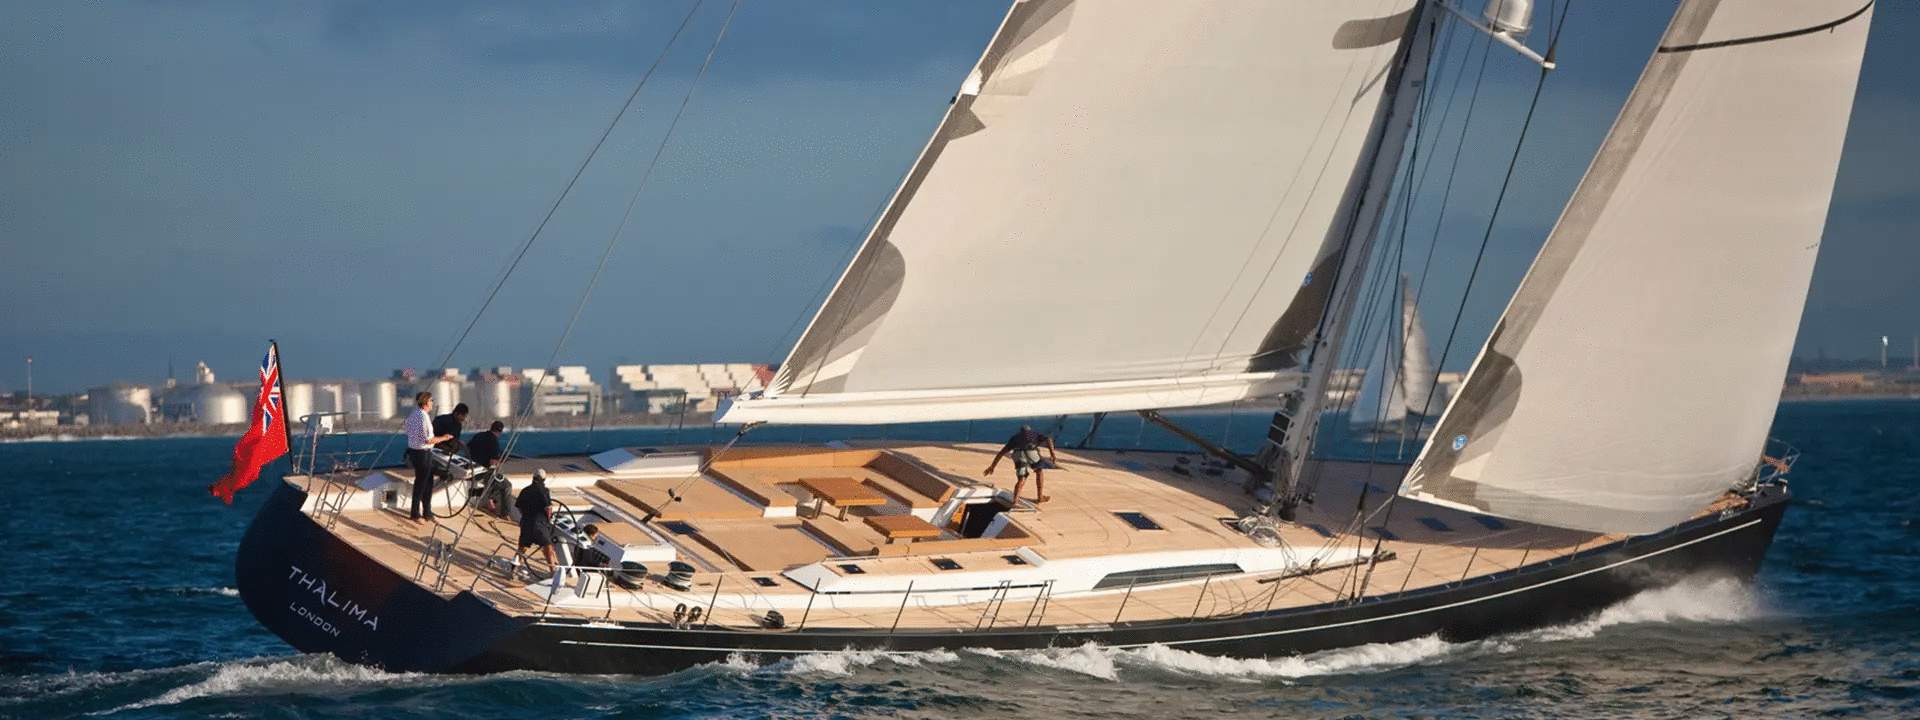 SWS yachts